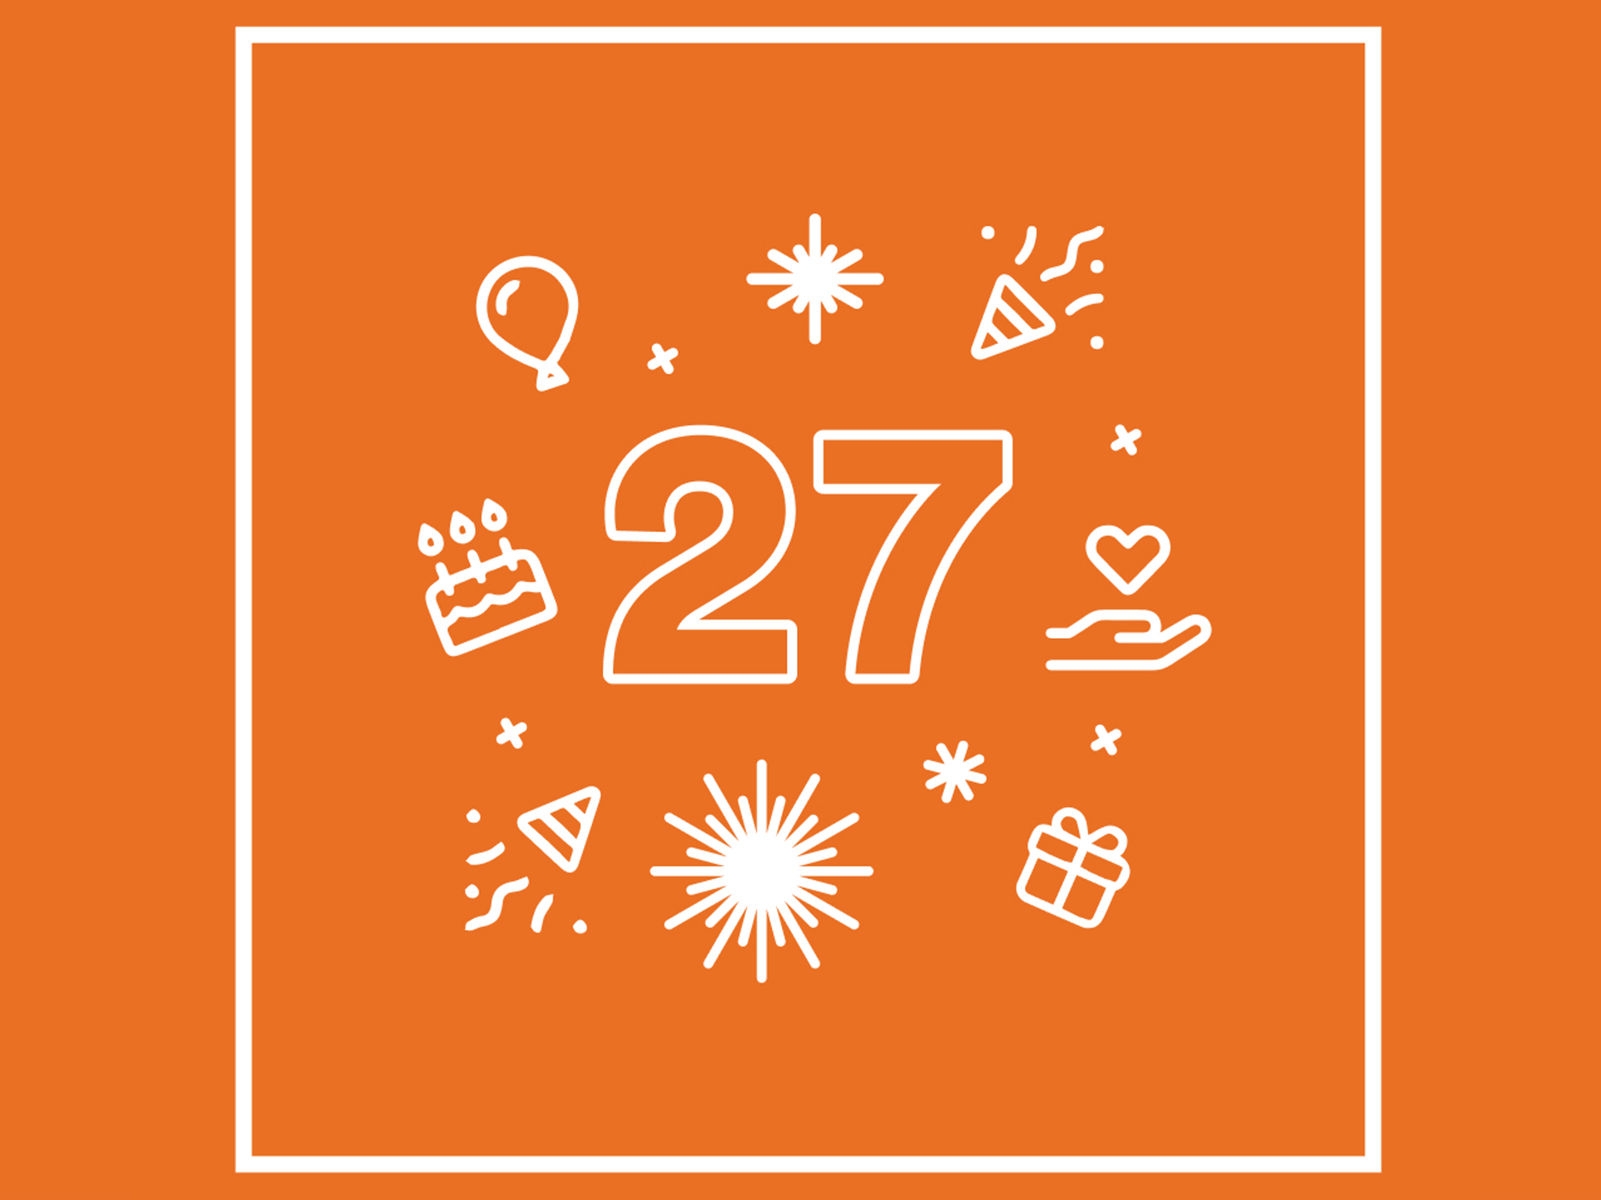 A festive orange logo with the number 27 in the middle.